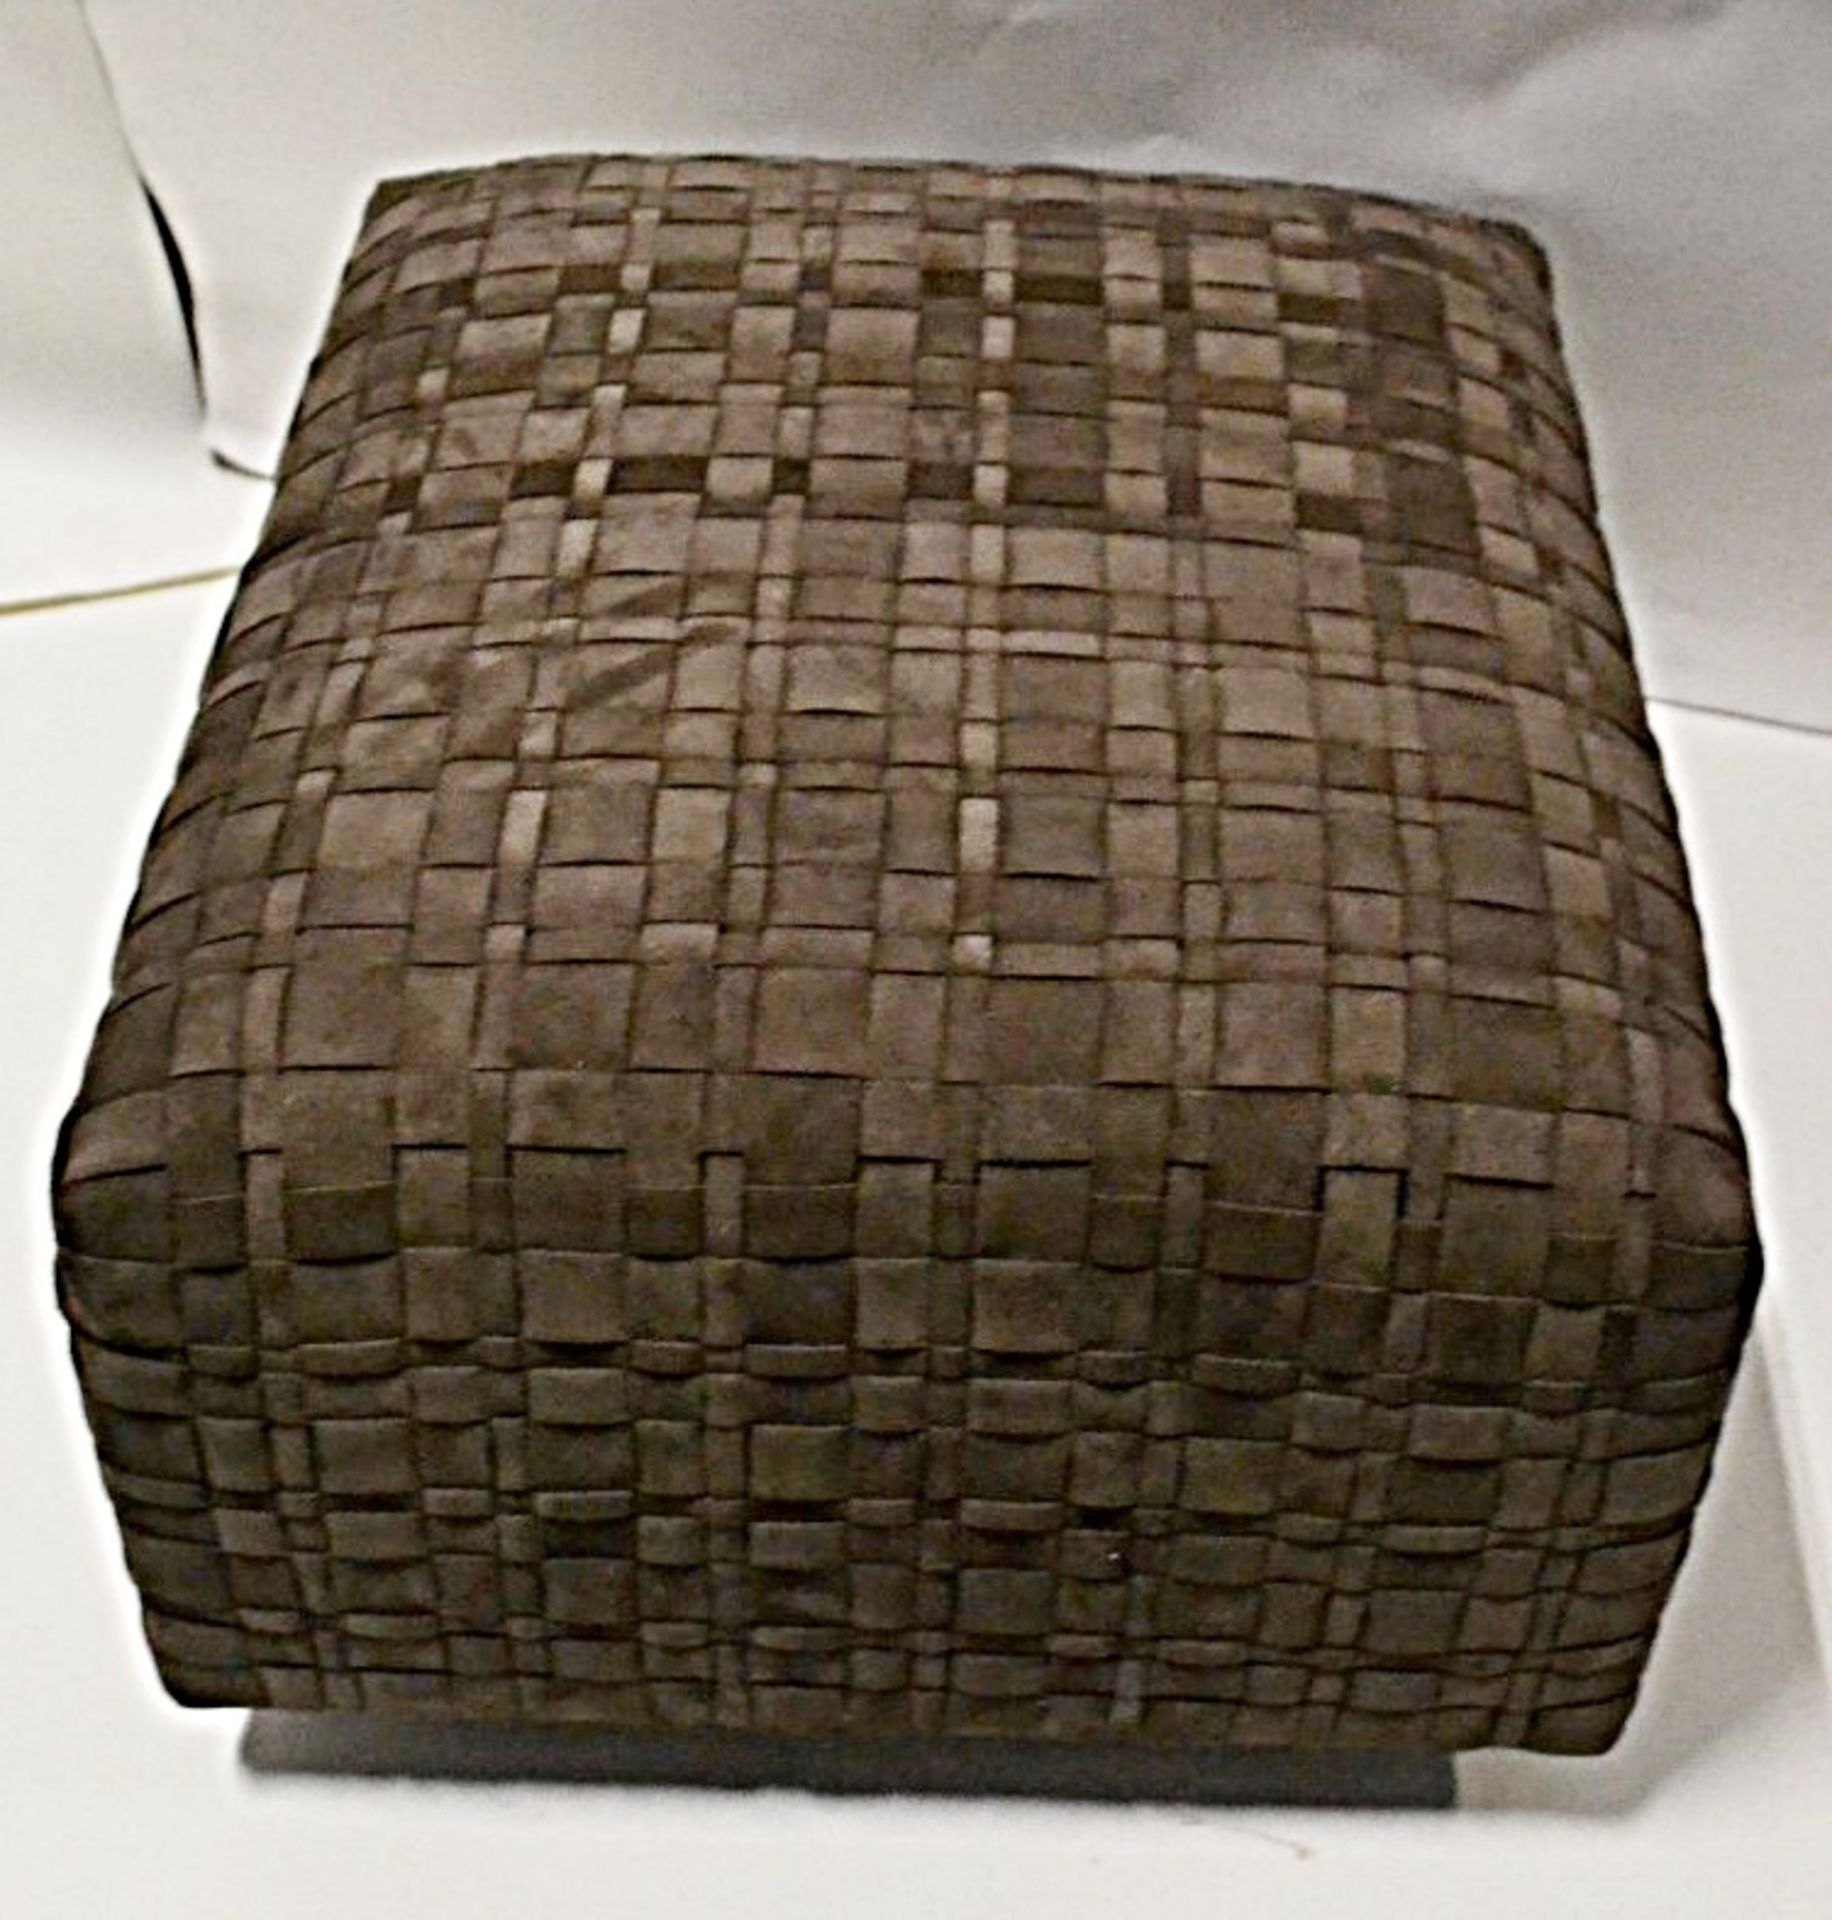 1 x Flexform Bangkok Ottoman - Elegantly Upholstered In Woven Strips of Brown Suede Leather - - Image 7 of 8